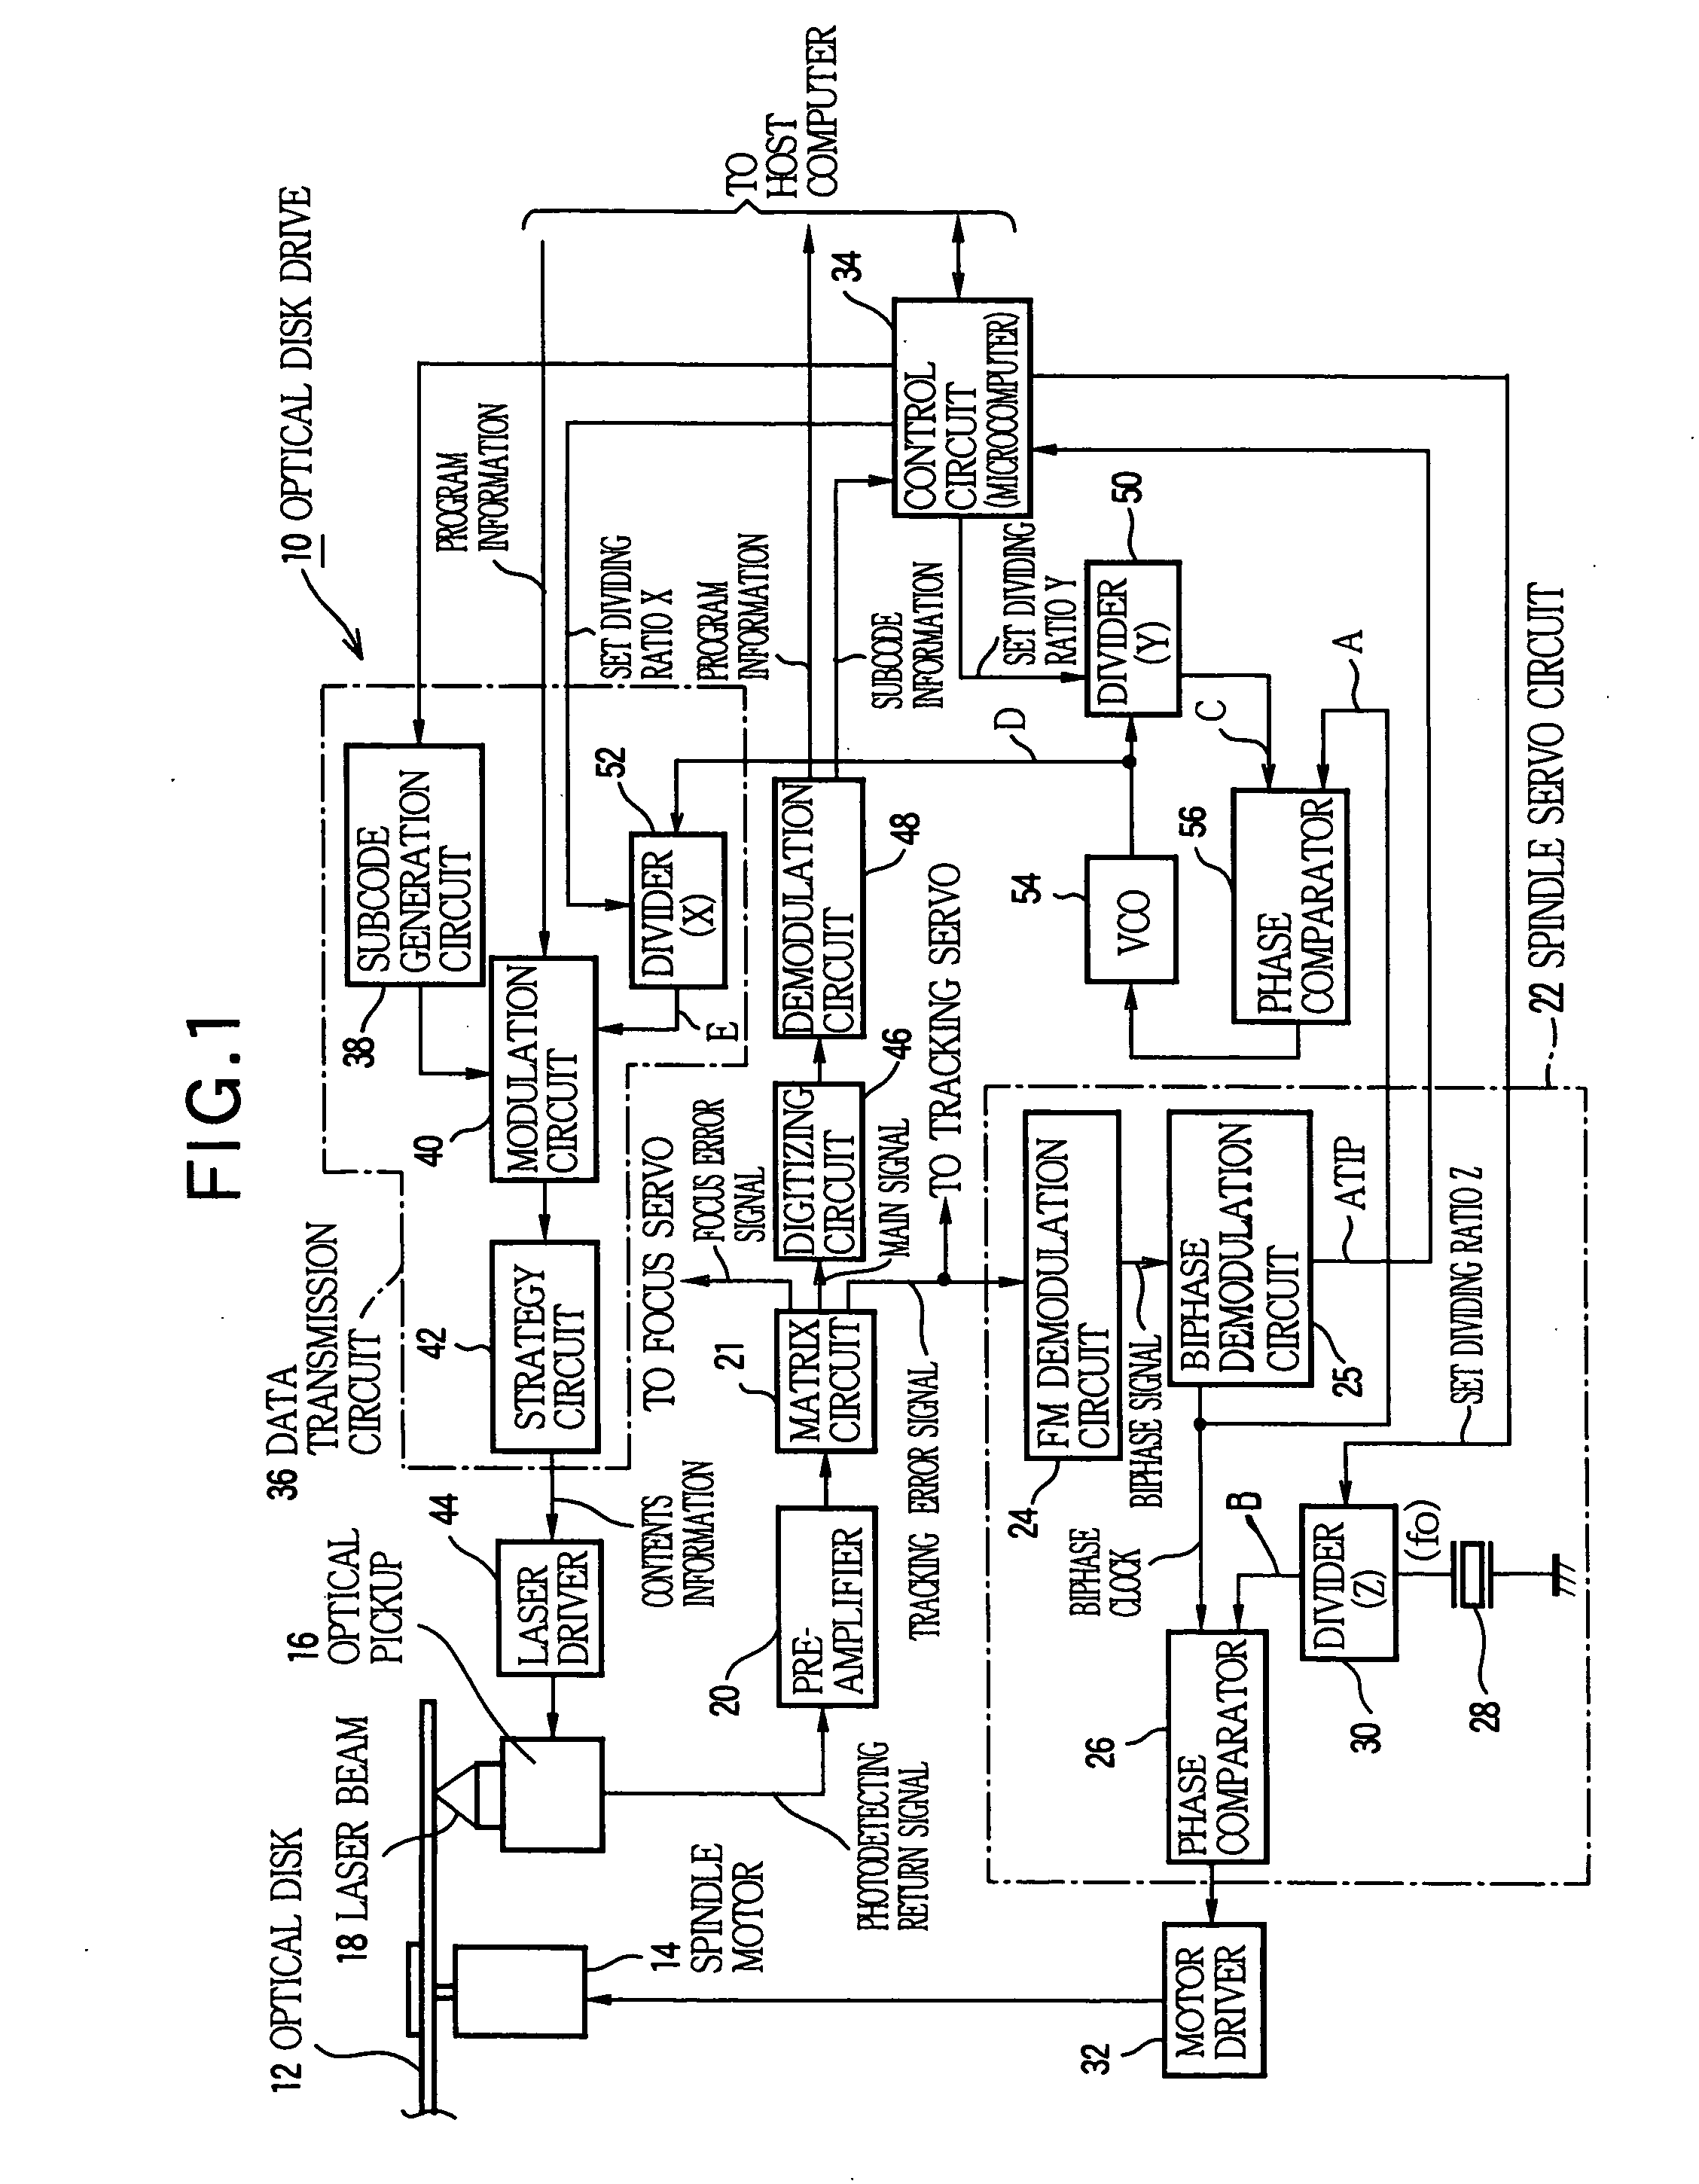 Optical disk recorder for writing data with variable density